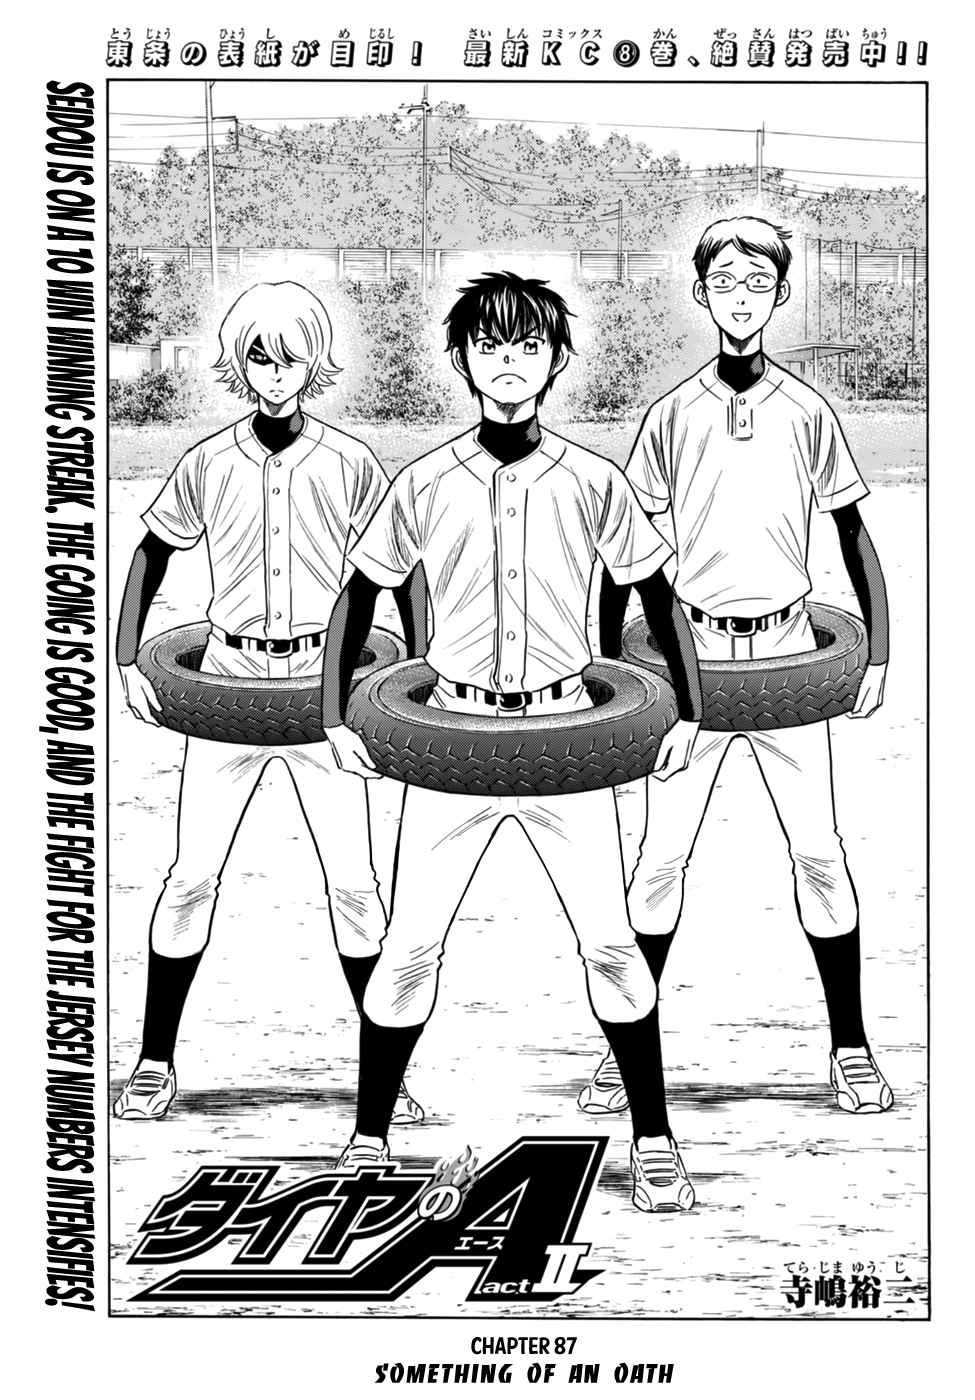 Diamond no Ace Act II Vol. 10 Ch. 87 Something of an Oath